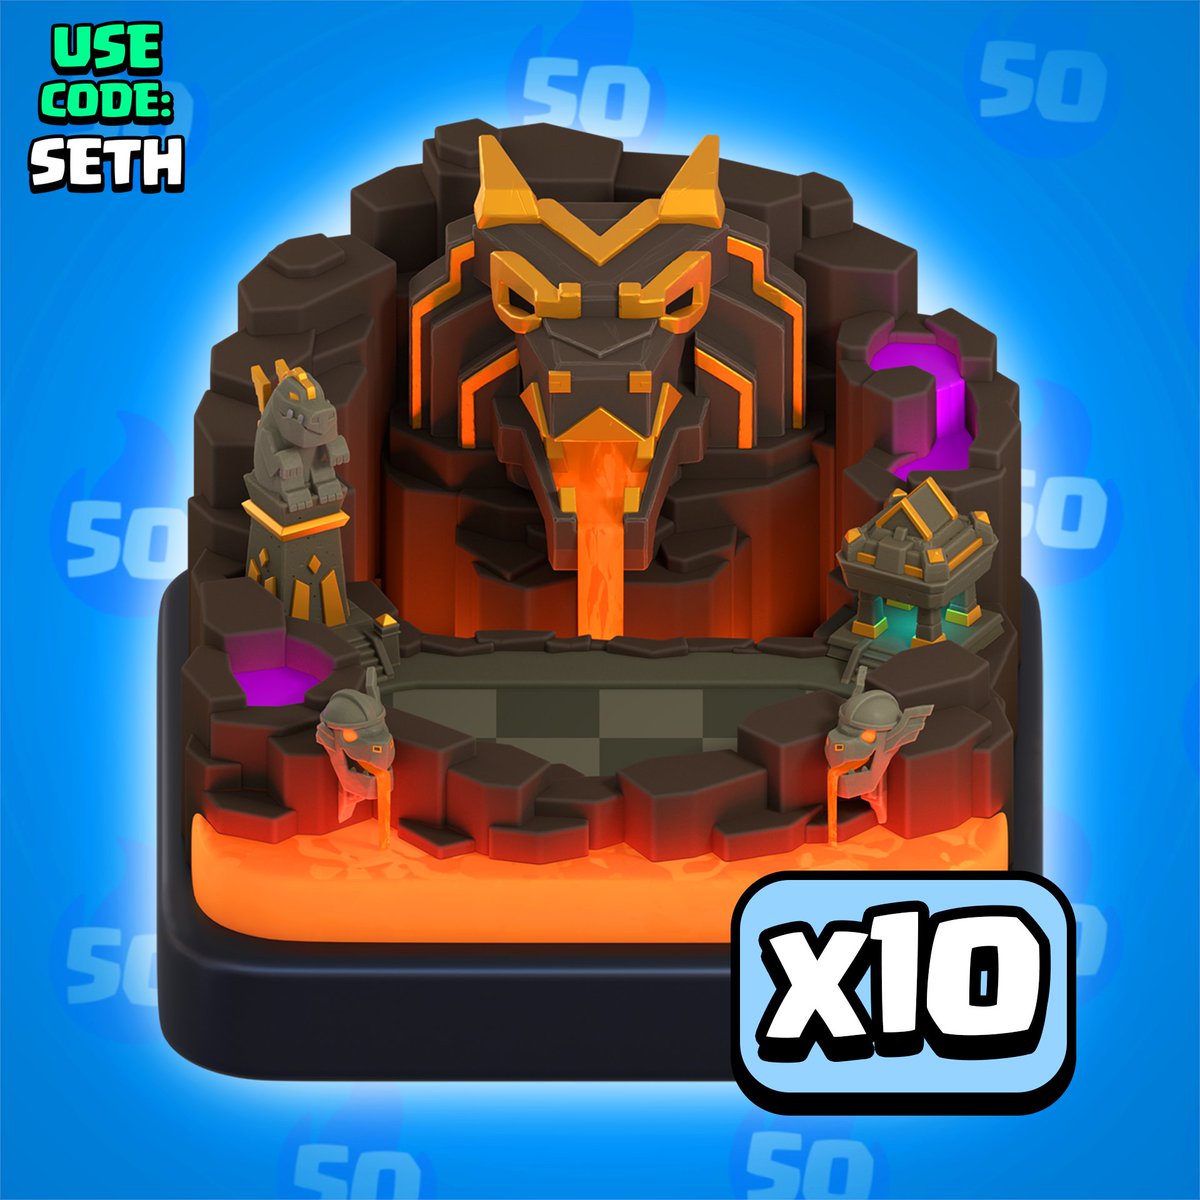 Day 1/5 of The Biggest Giveaway Ever! 🔥

Today's prize: 10x Shadow Sceneries ✨

To enter: Follow & Repost ✅
Winners drawn in 24 hrs ⏰

💪 This giveaway is sponsored by Creator Code: Seth

#GiftedBySupercell